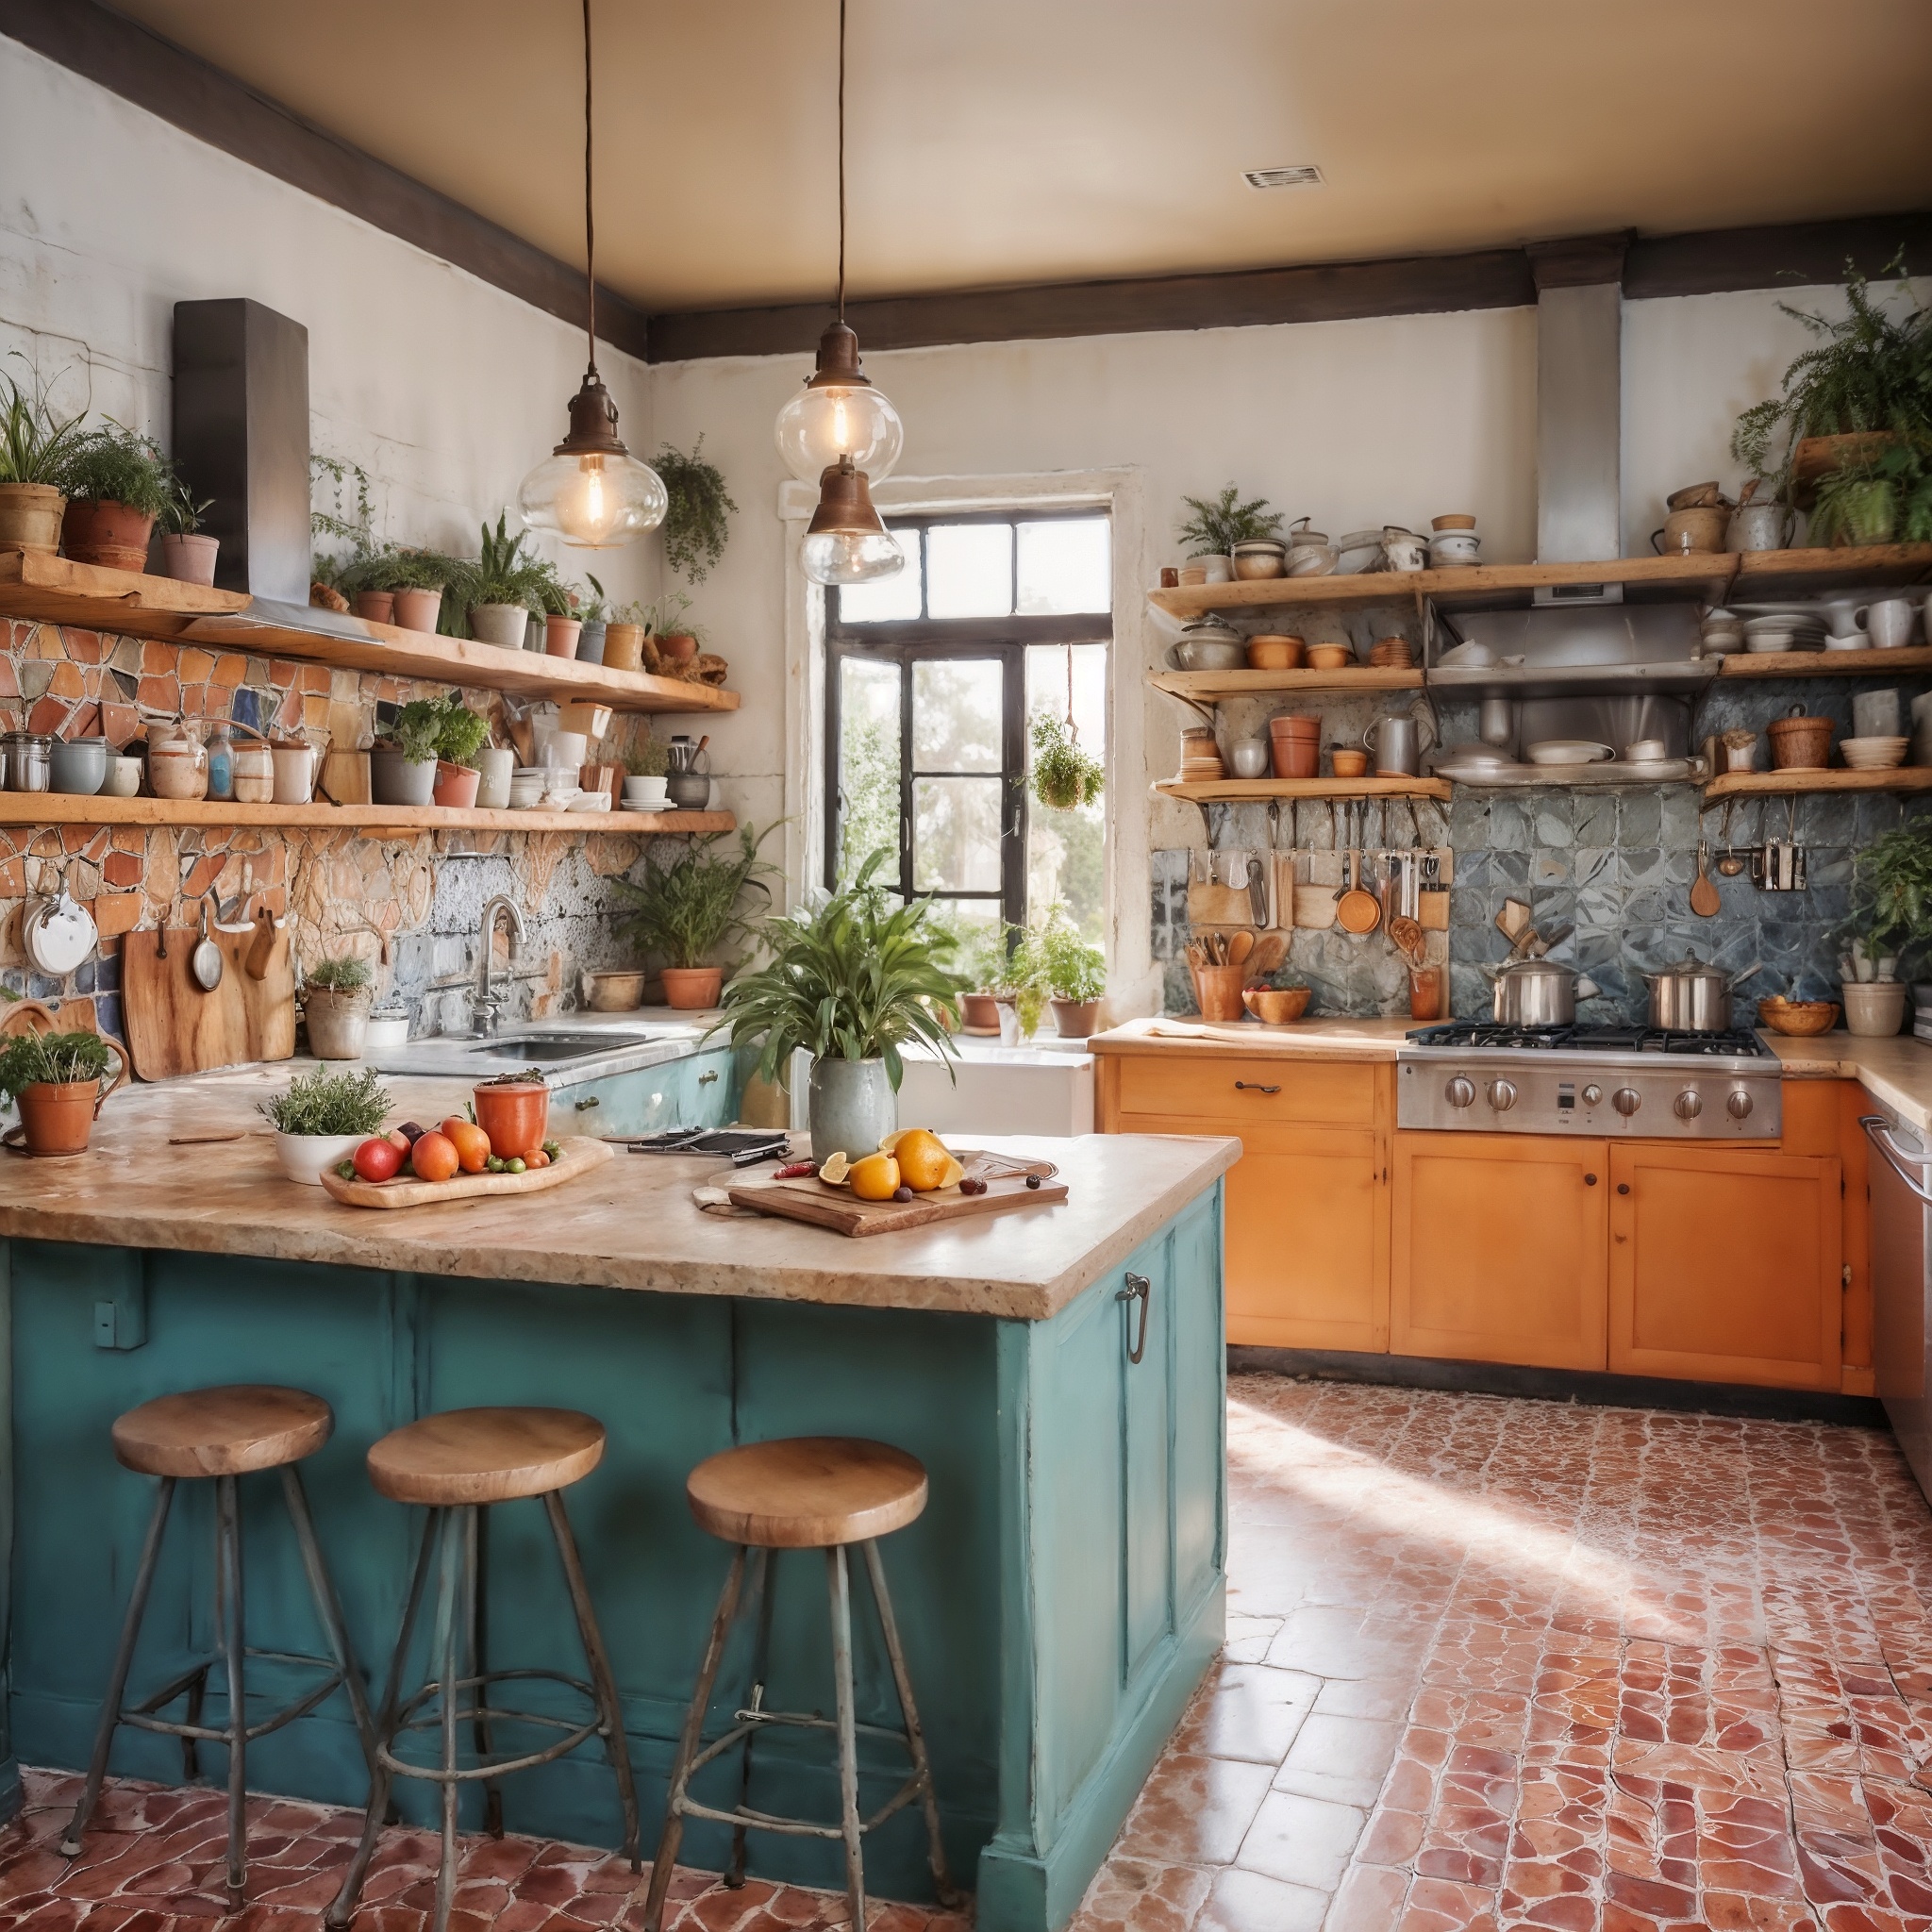 Eclectic Kitchen Layout With a Mix of Colors and Materials, Open Shelving